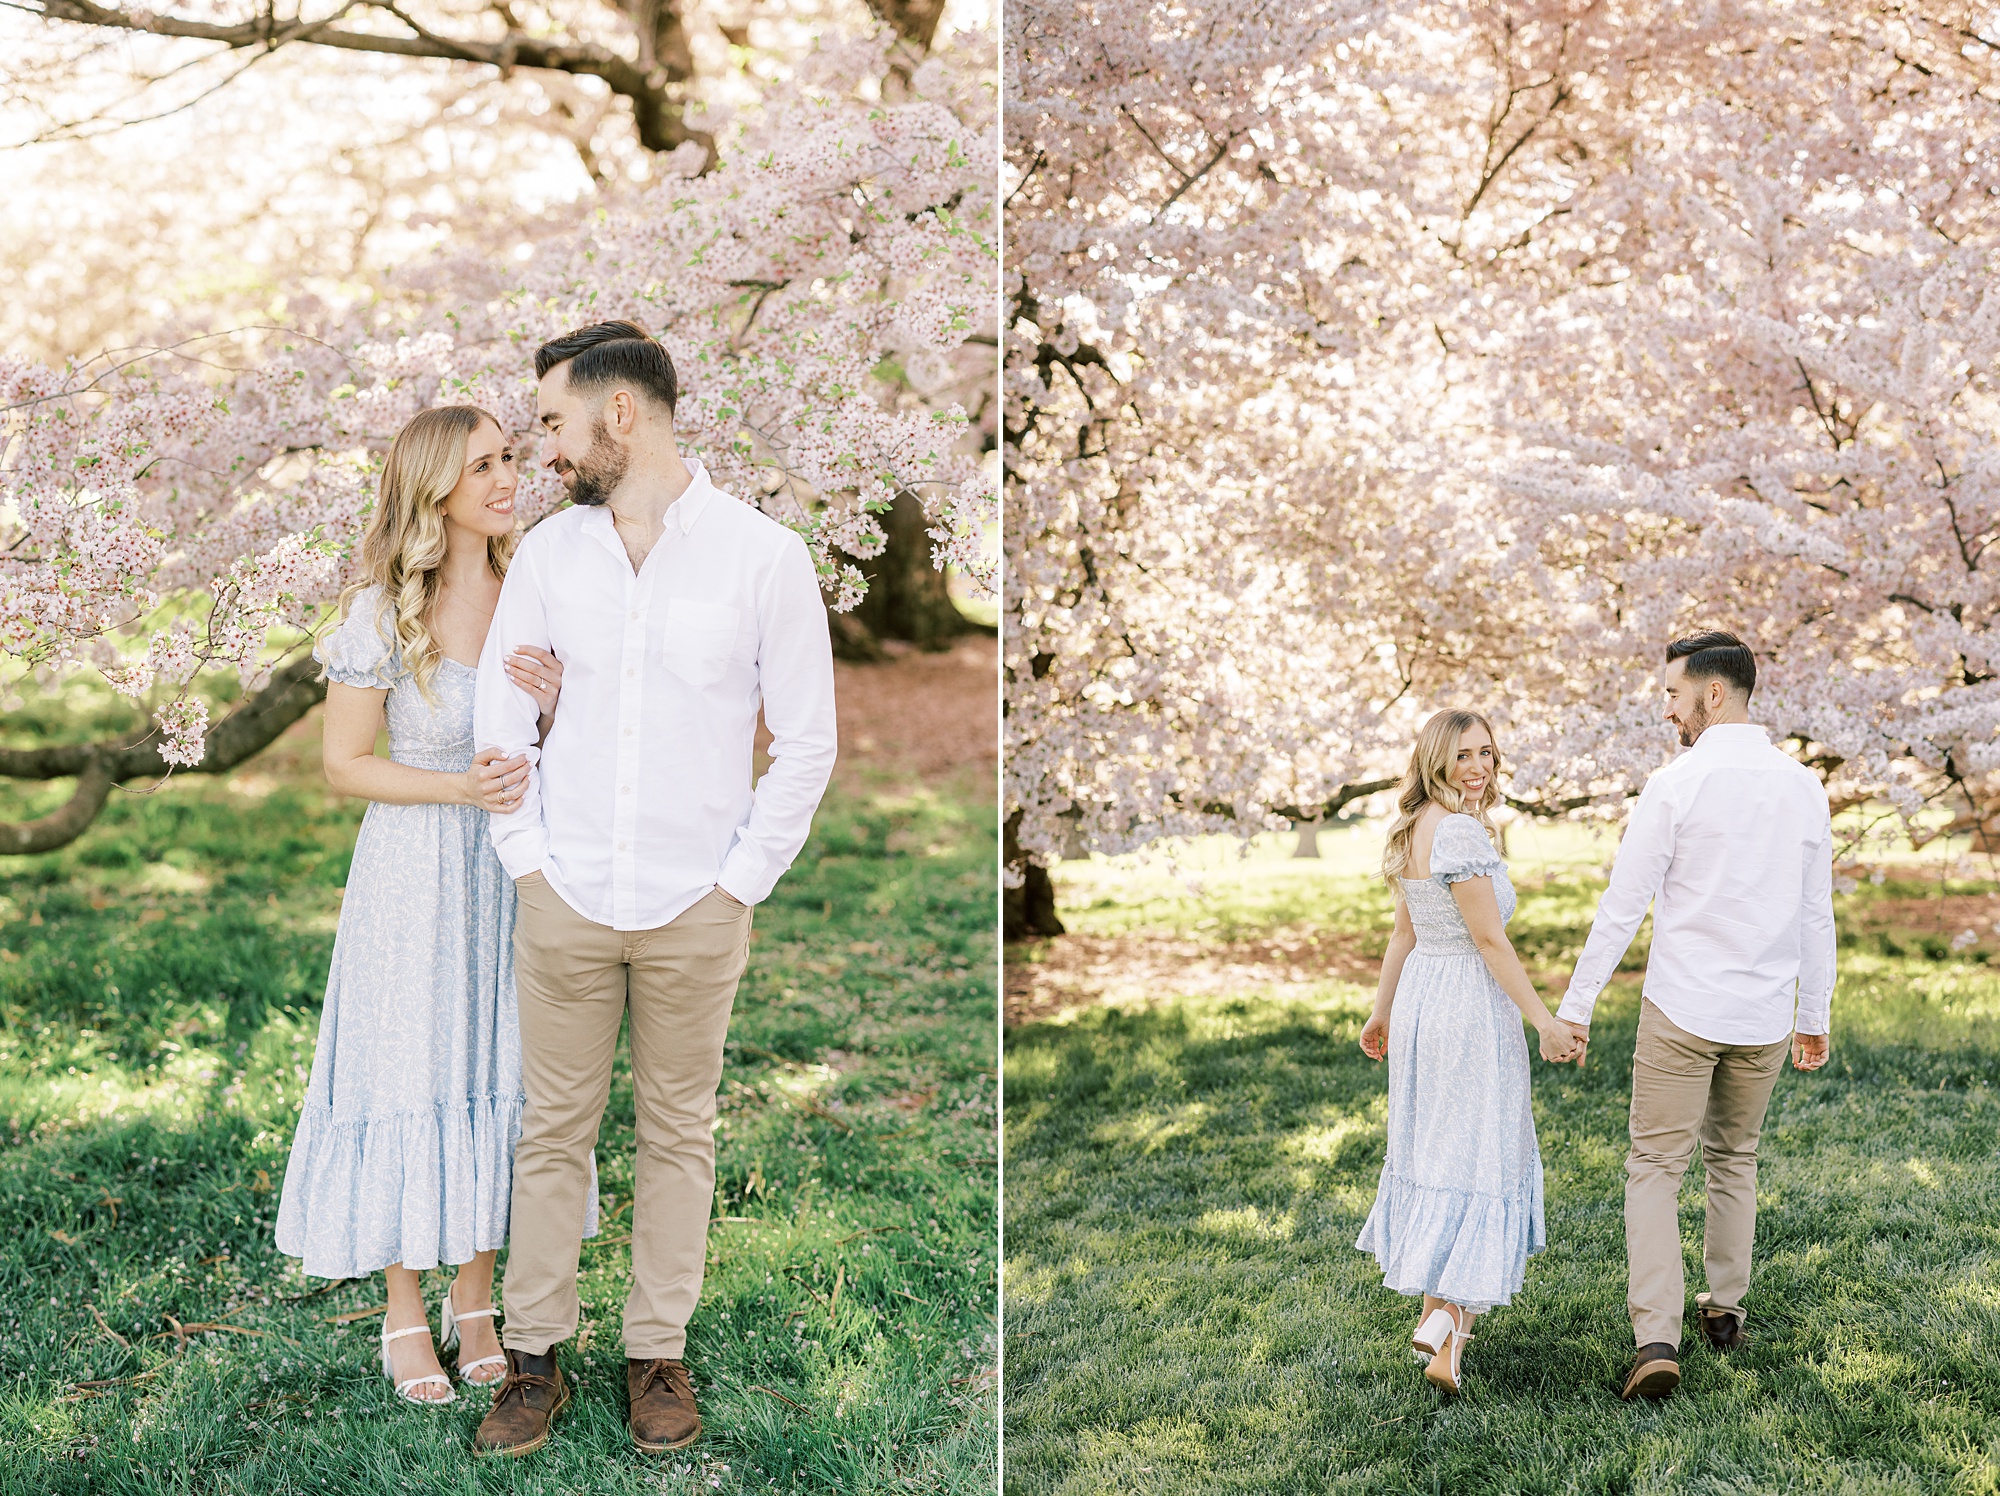 woman holds man's arm walking through field of cherry blossom trees